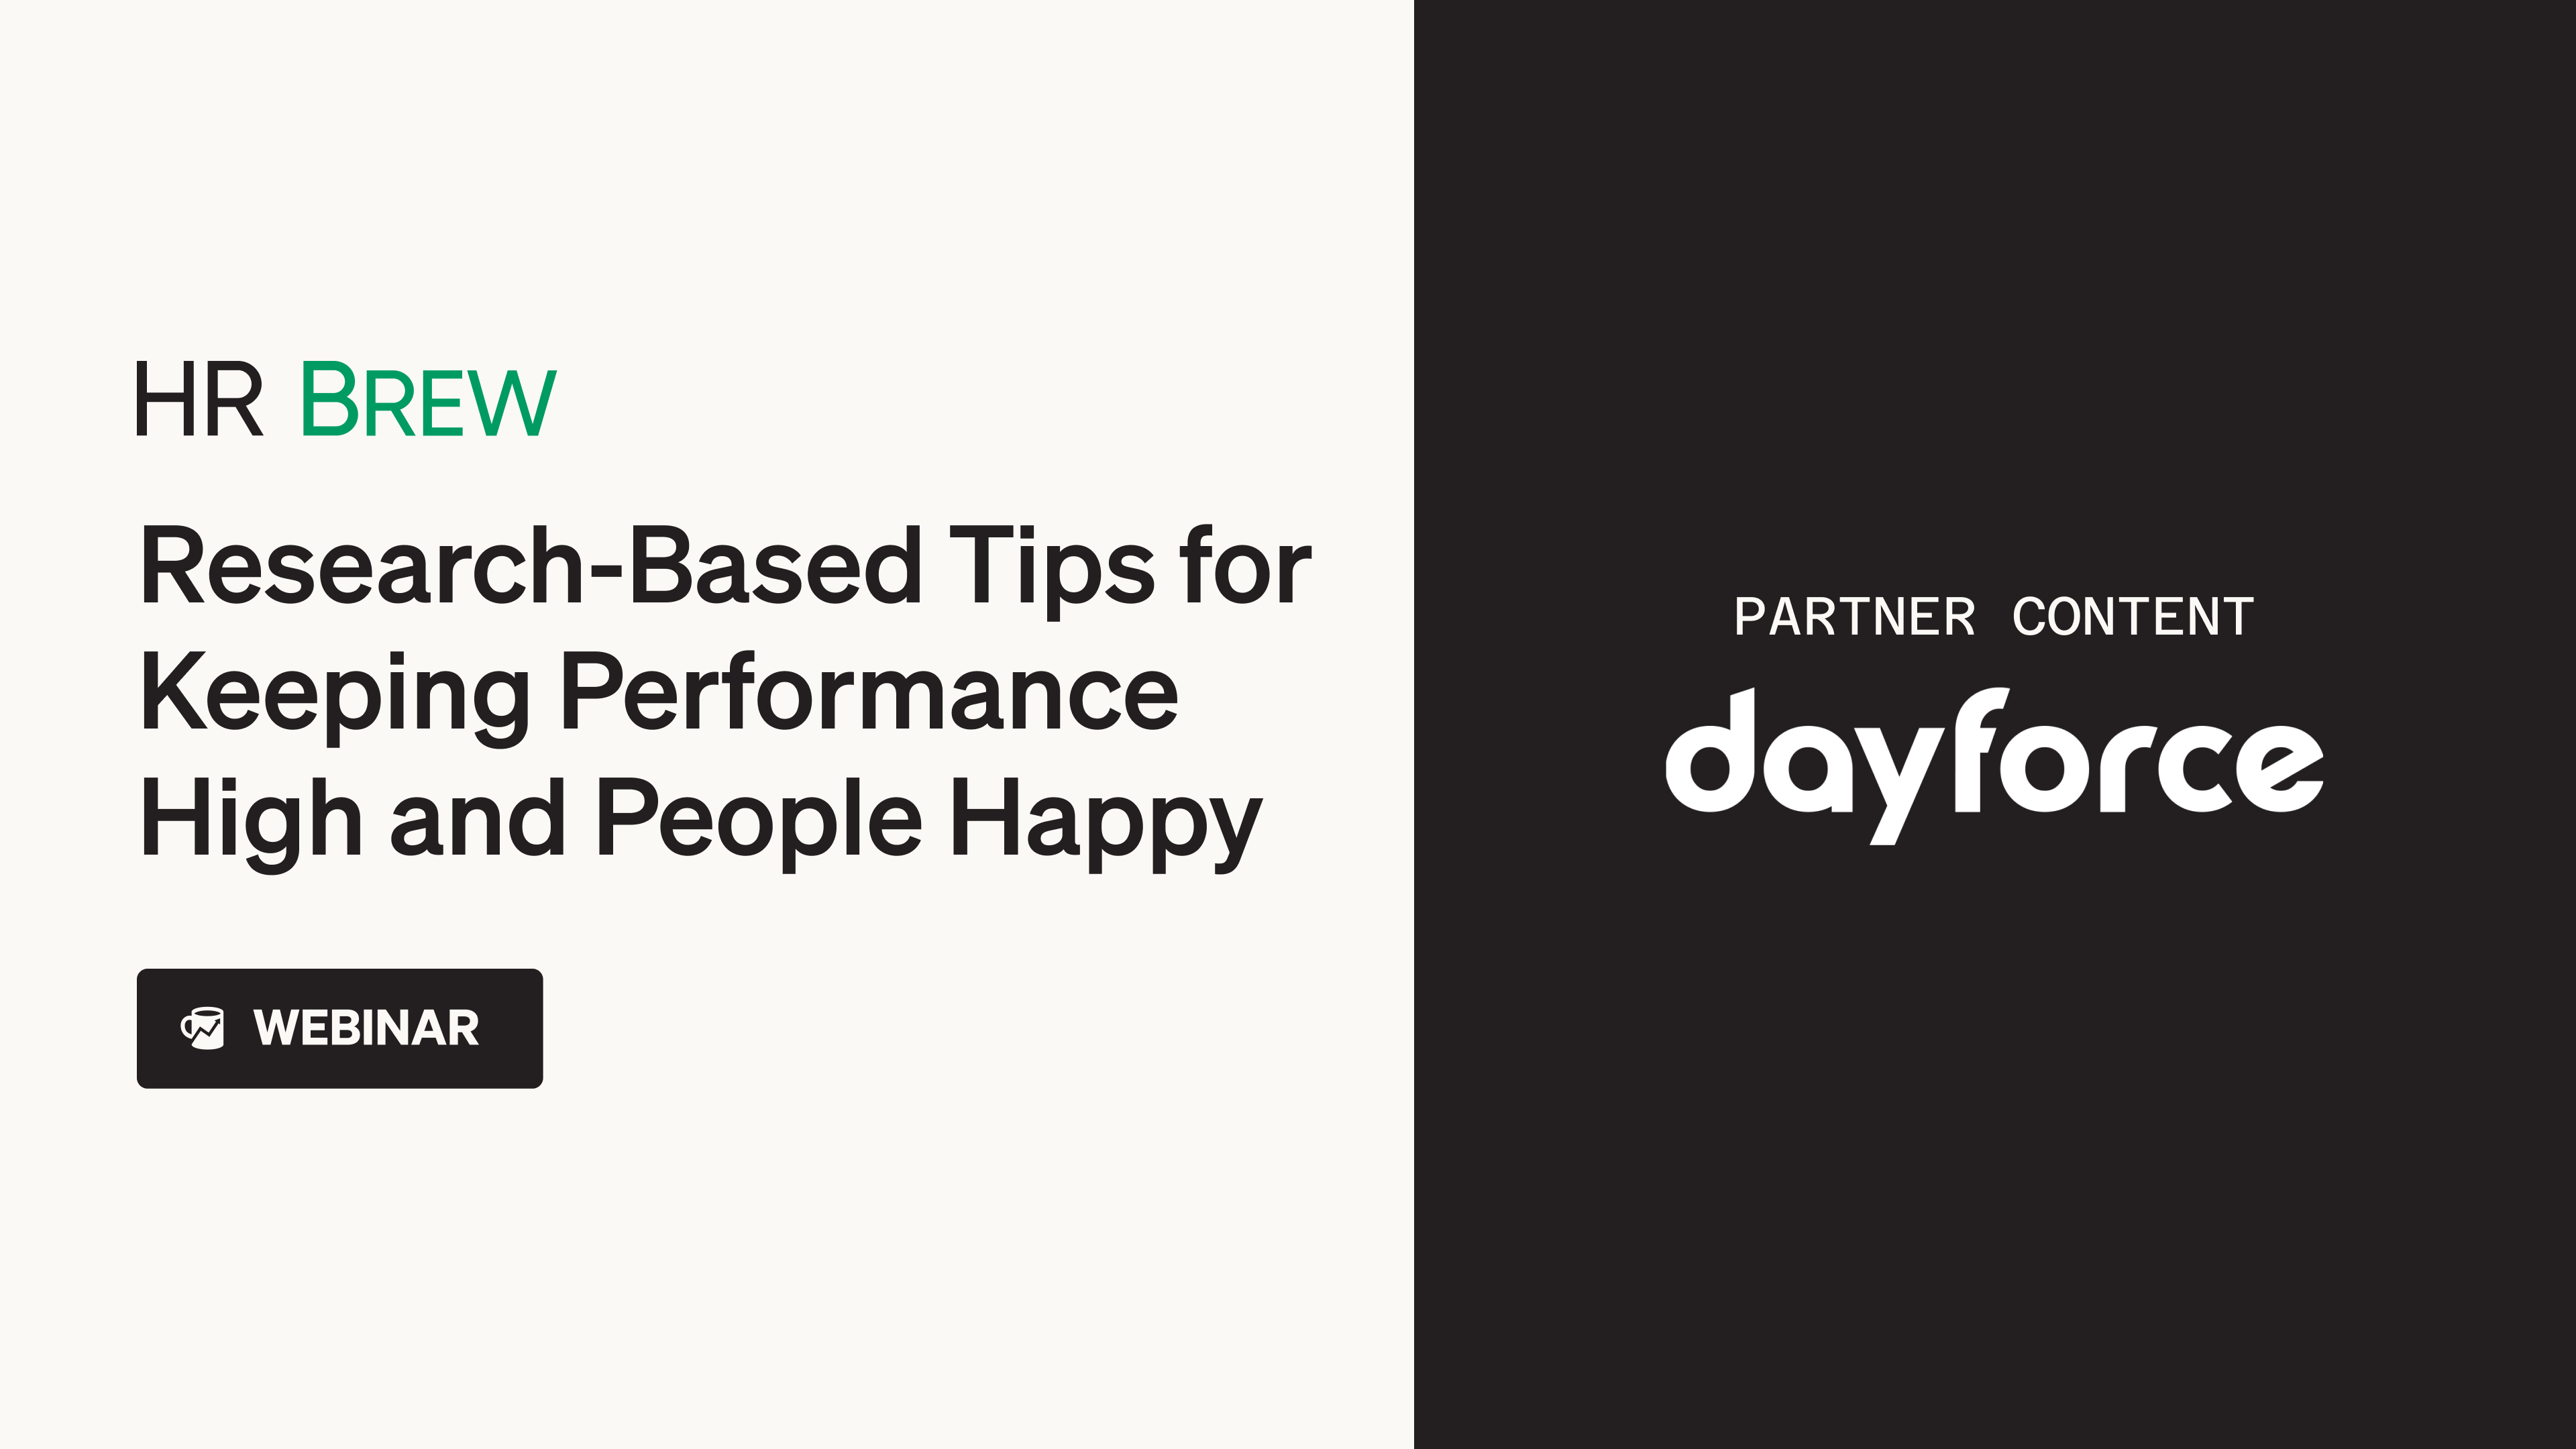 HR Brew presents Research-Based Tips for Keeping Performance High and People Happy, partner content from Dayforce